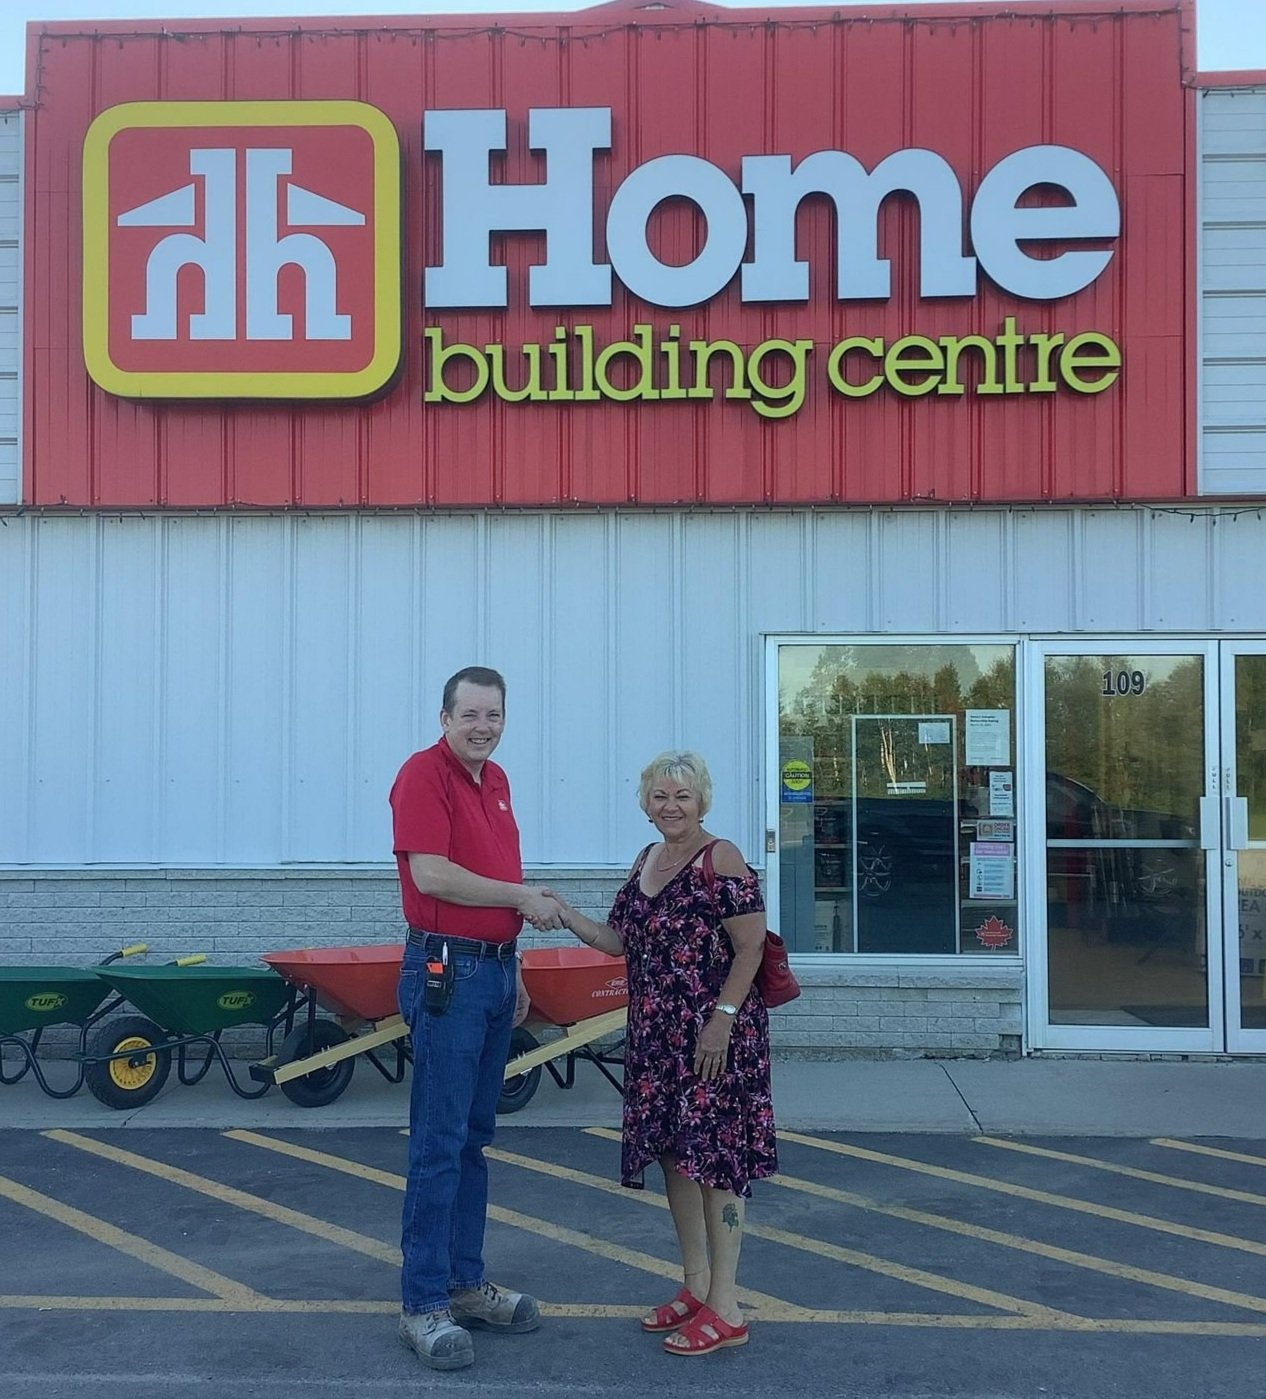 Winner of the Spring Contest- $500 Gift Certificate from Wawa Home Buidling Centre